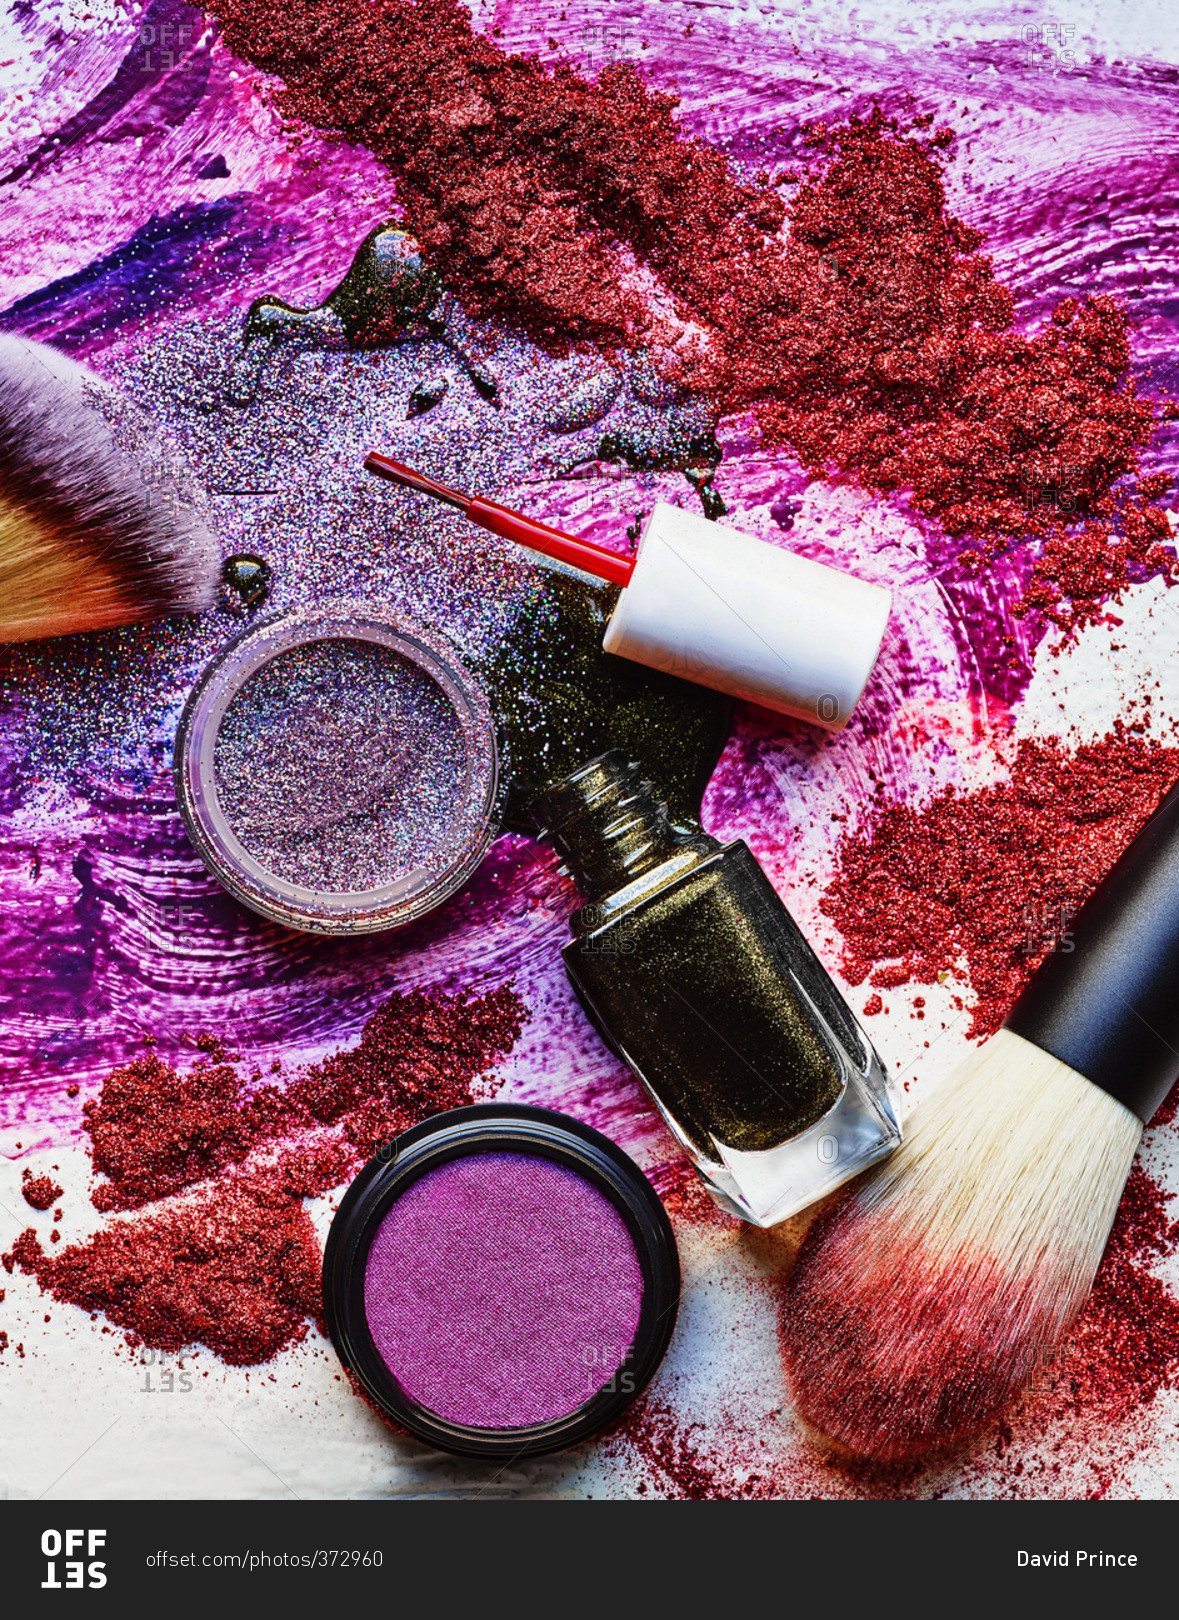 Spilled beauty products